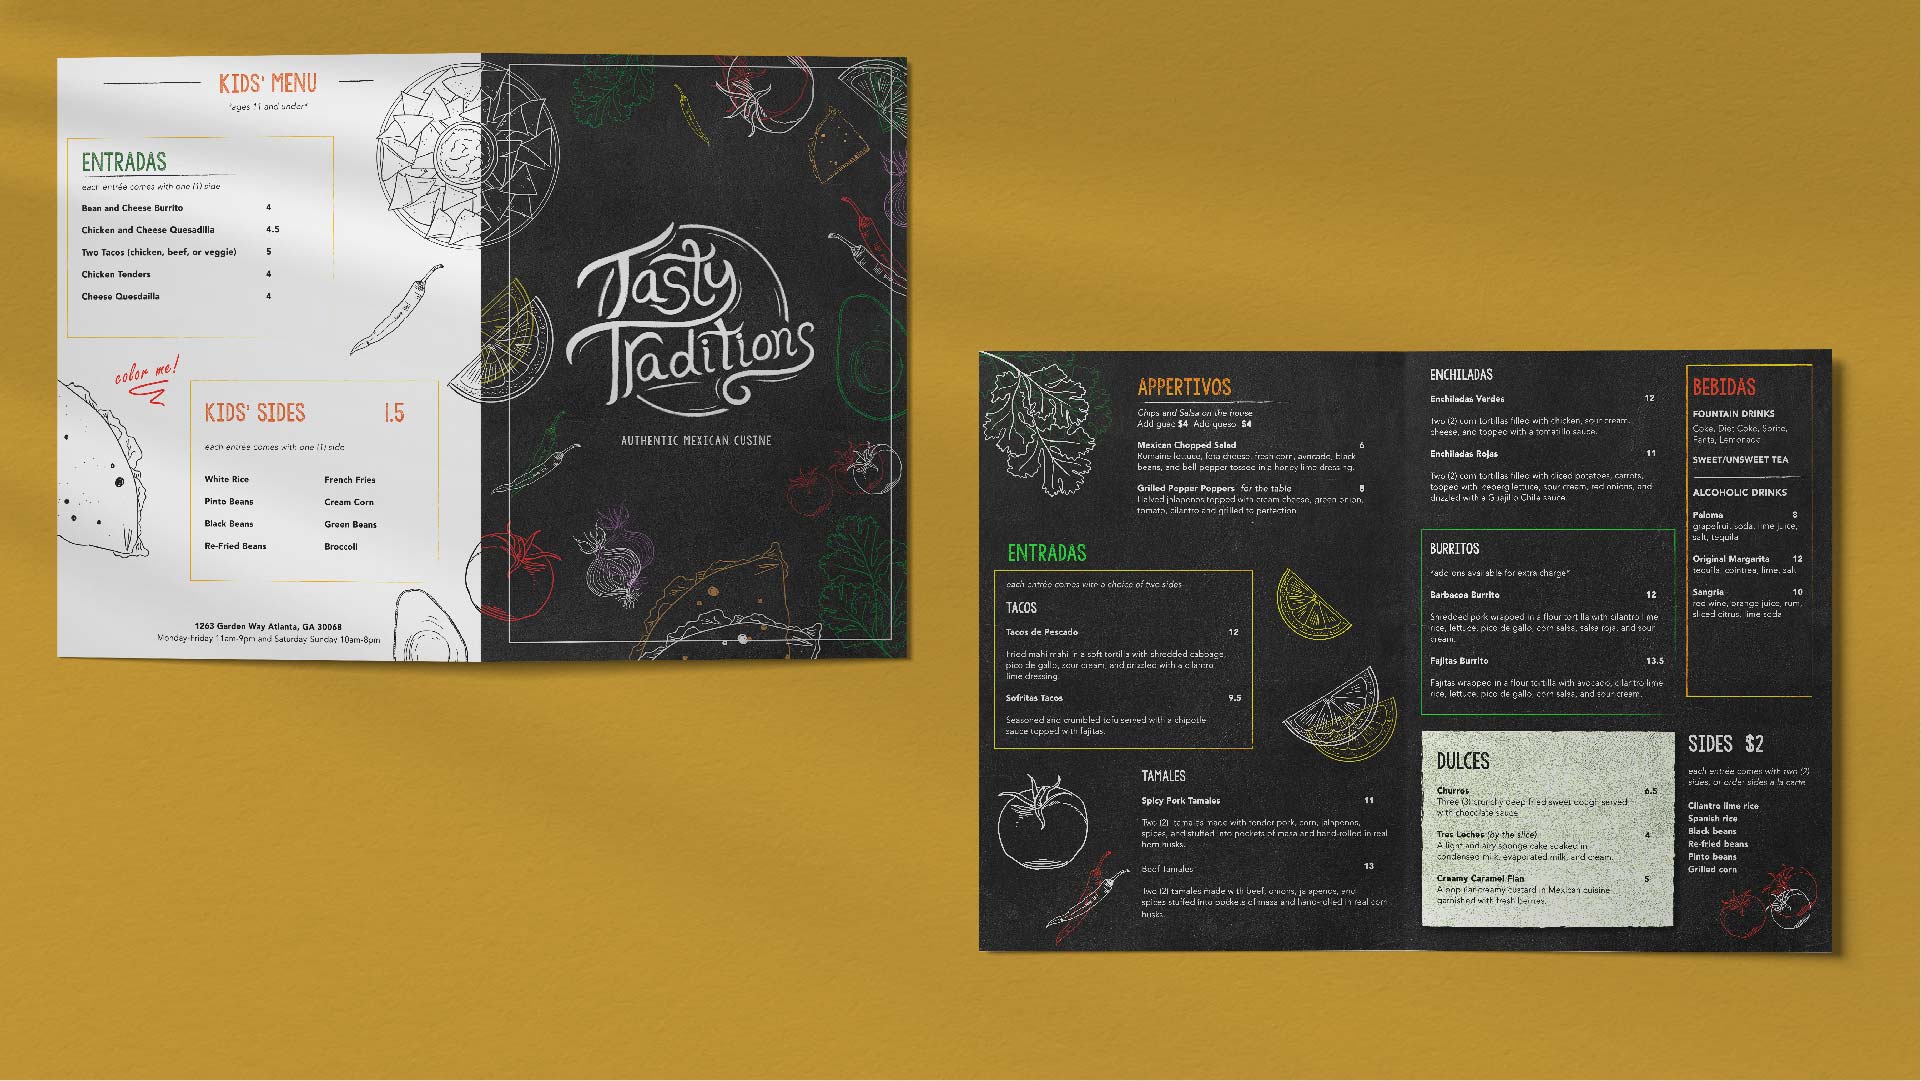 "Tasty Traditions." /  "Tasty Traditions." Menu Design 34x17 inches, print 2022. Tasty Traditions is a Mexican Restaurant that thrives on authenticity and being one-of-a-kind. This menu re-design supports those values.